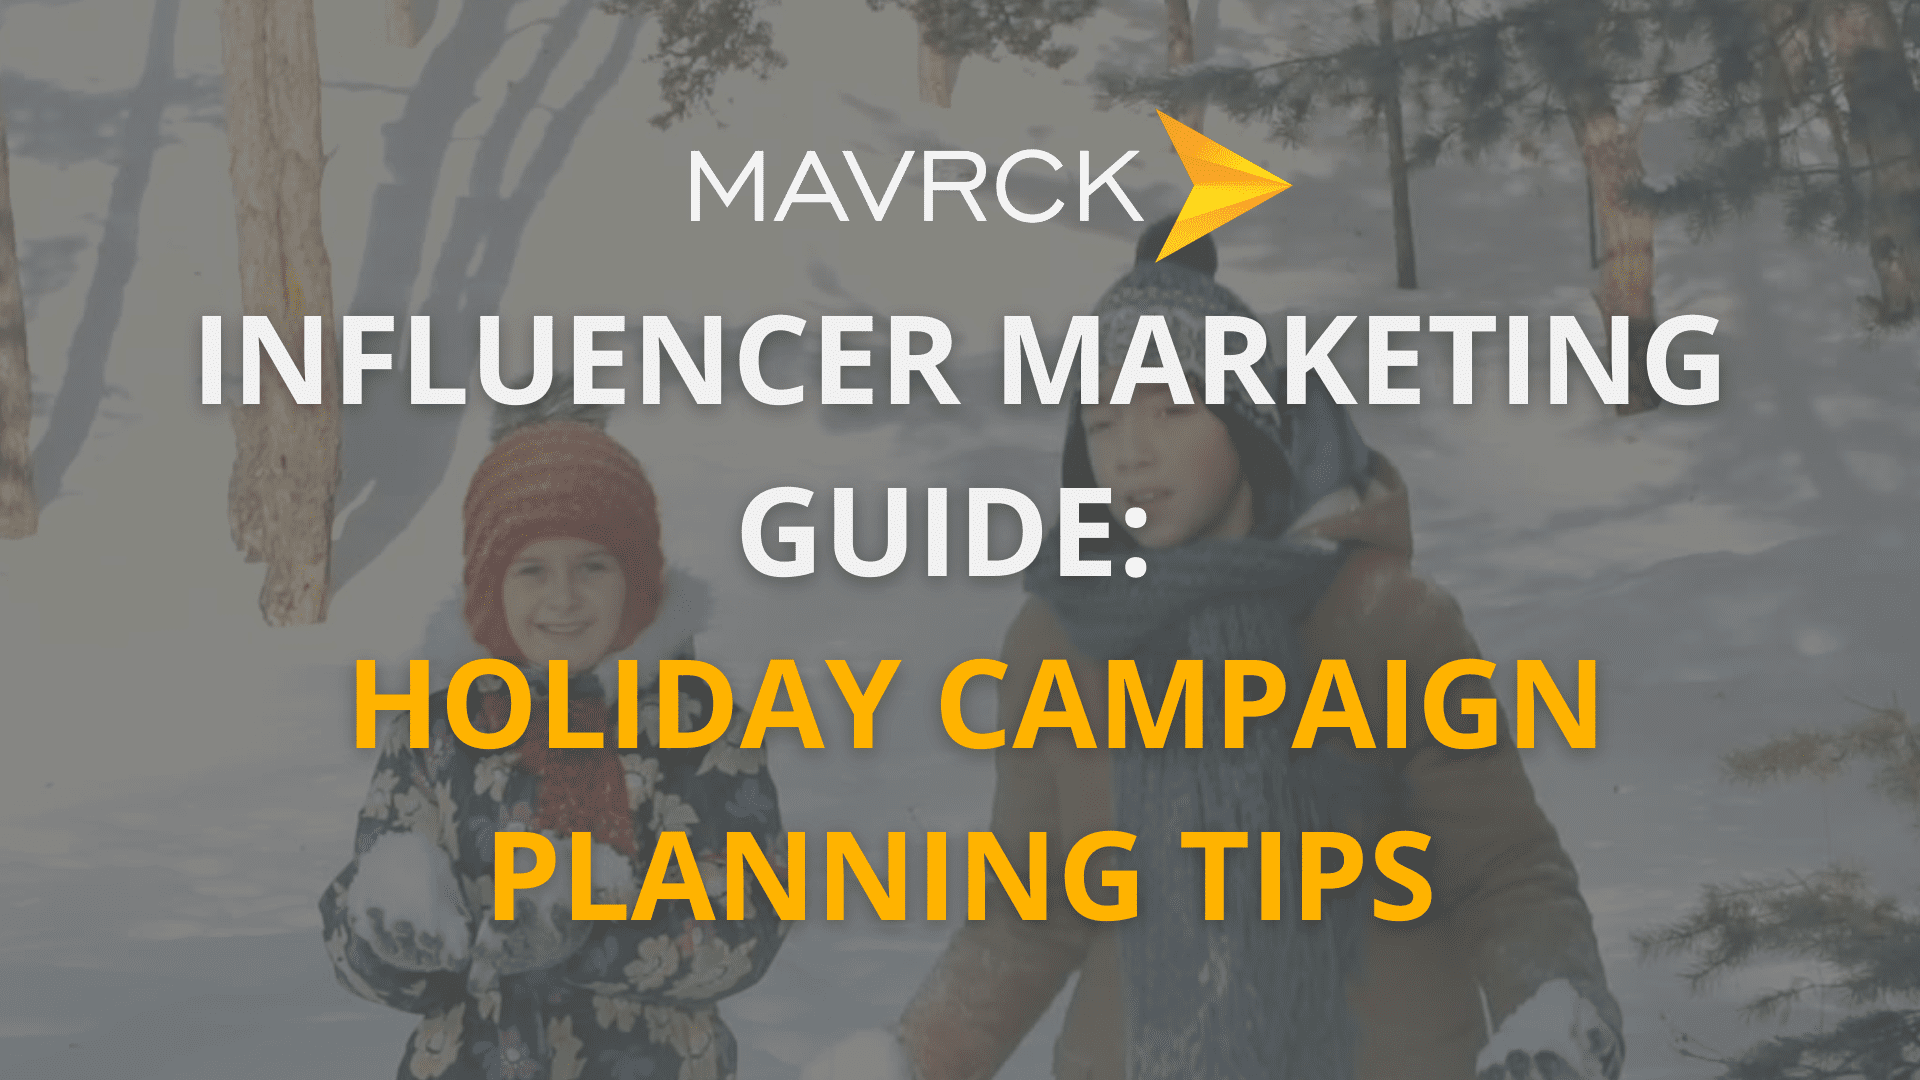 Influencer marketing guide to holiday campaign planning tips